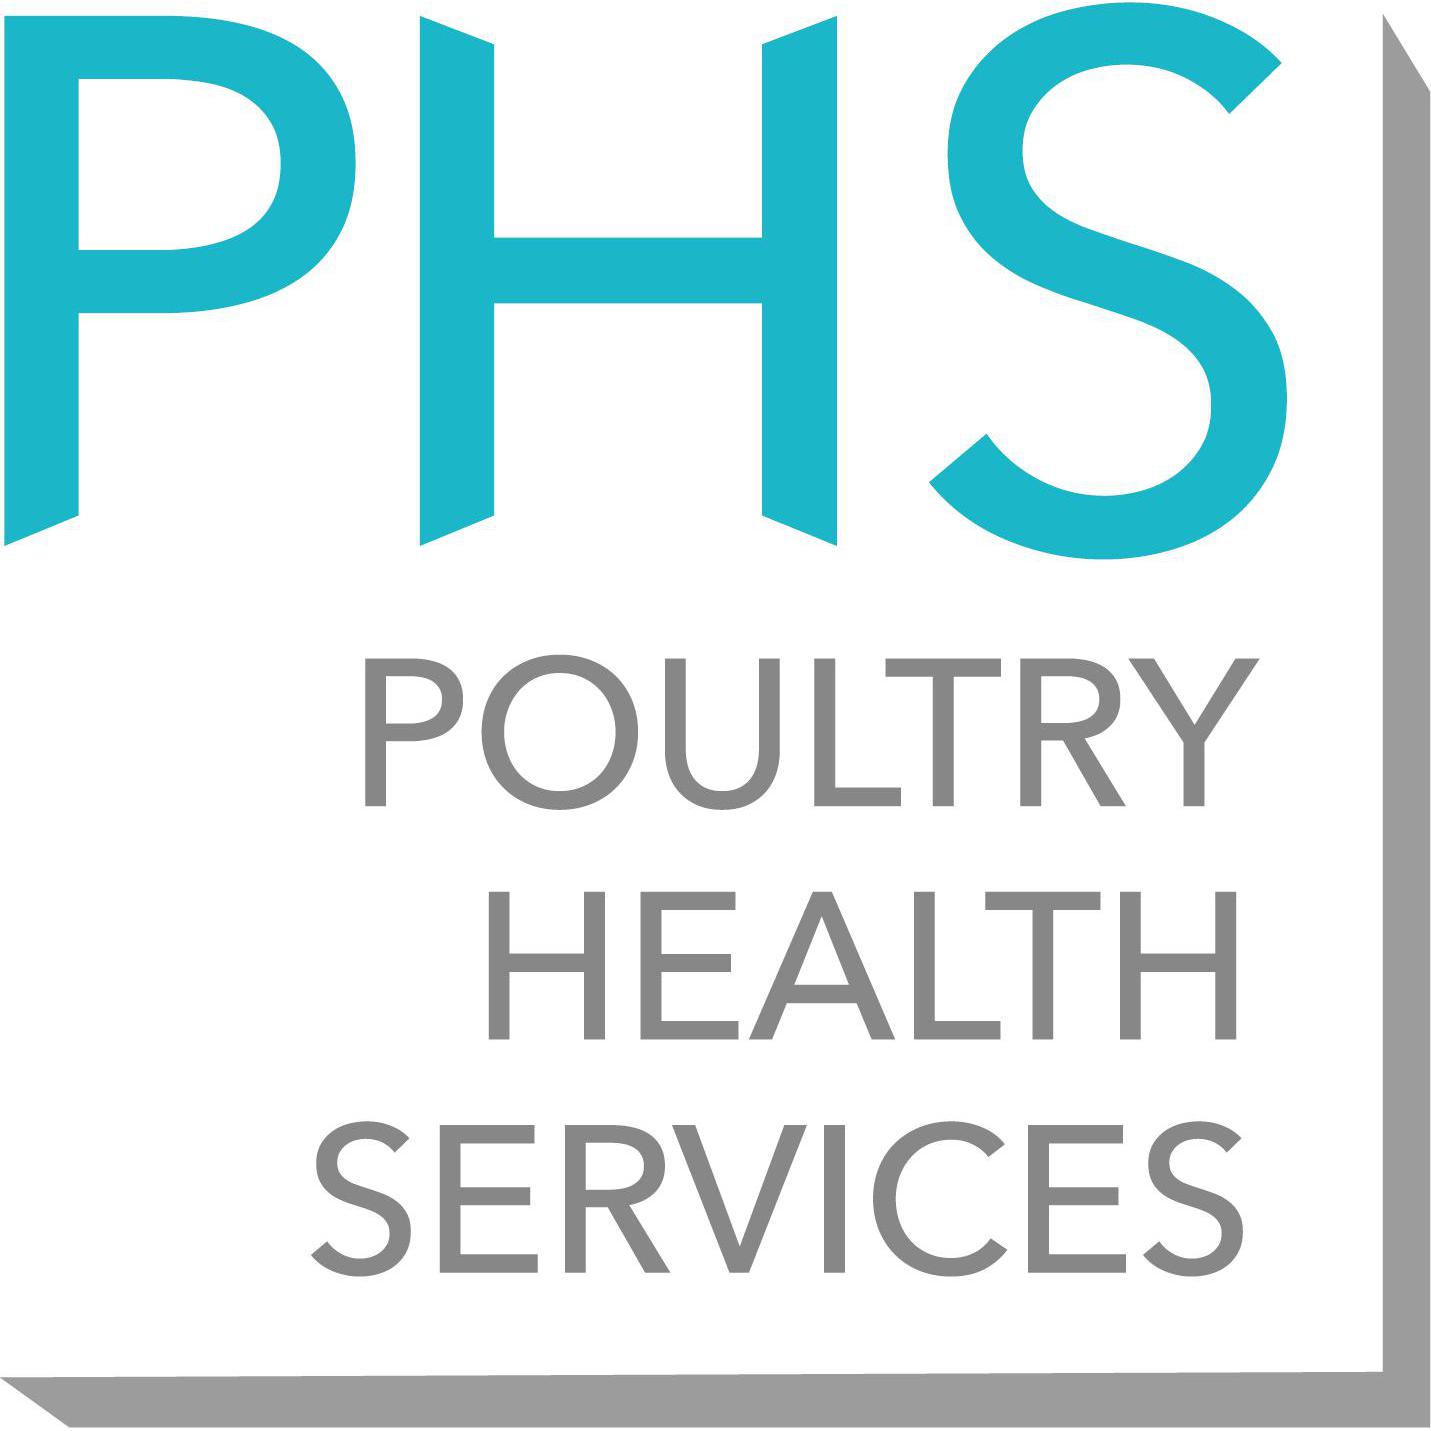 Poultry Health Services, Leominster - Leominster, Herefordshire HR6 0LX - 01568 610343 | ShowMeLocal.com